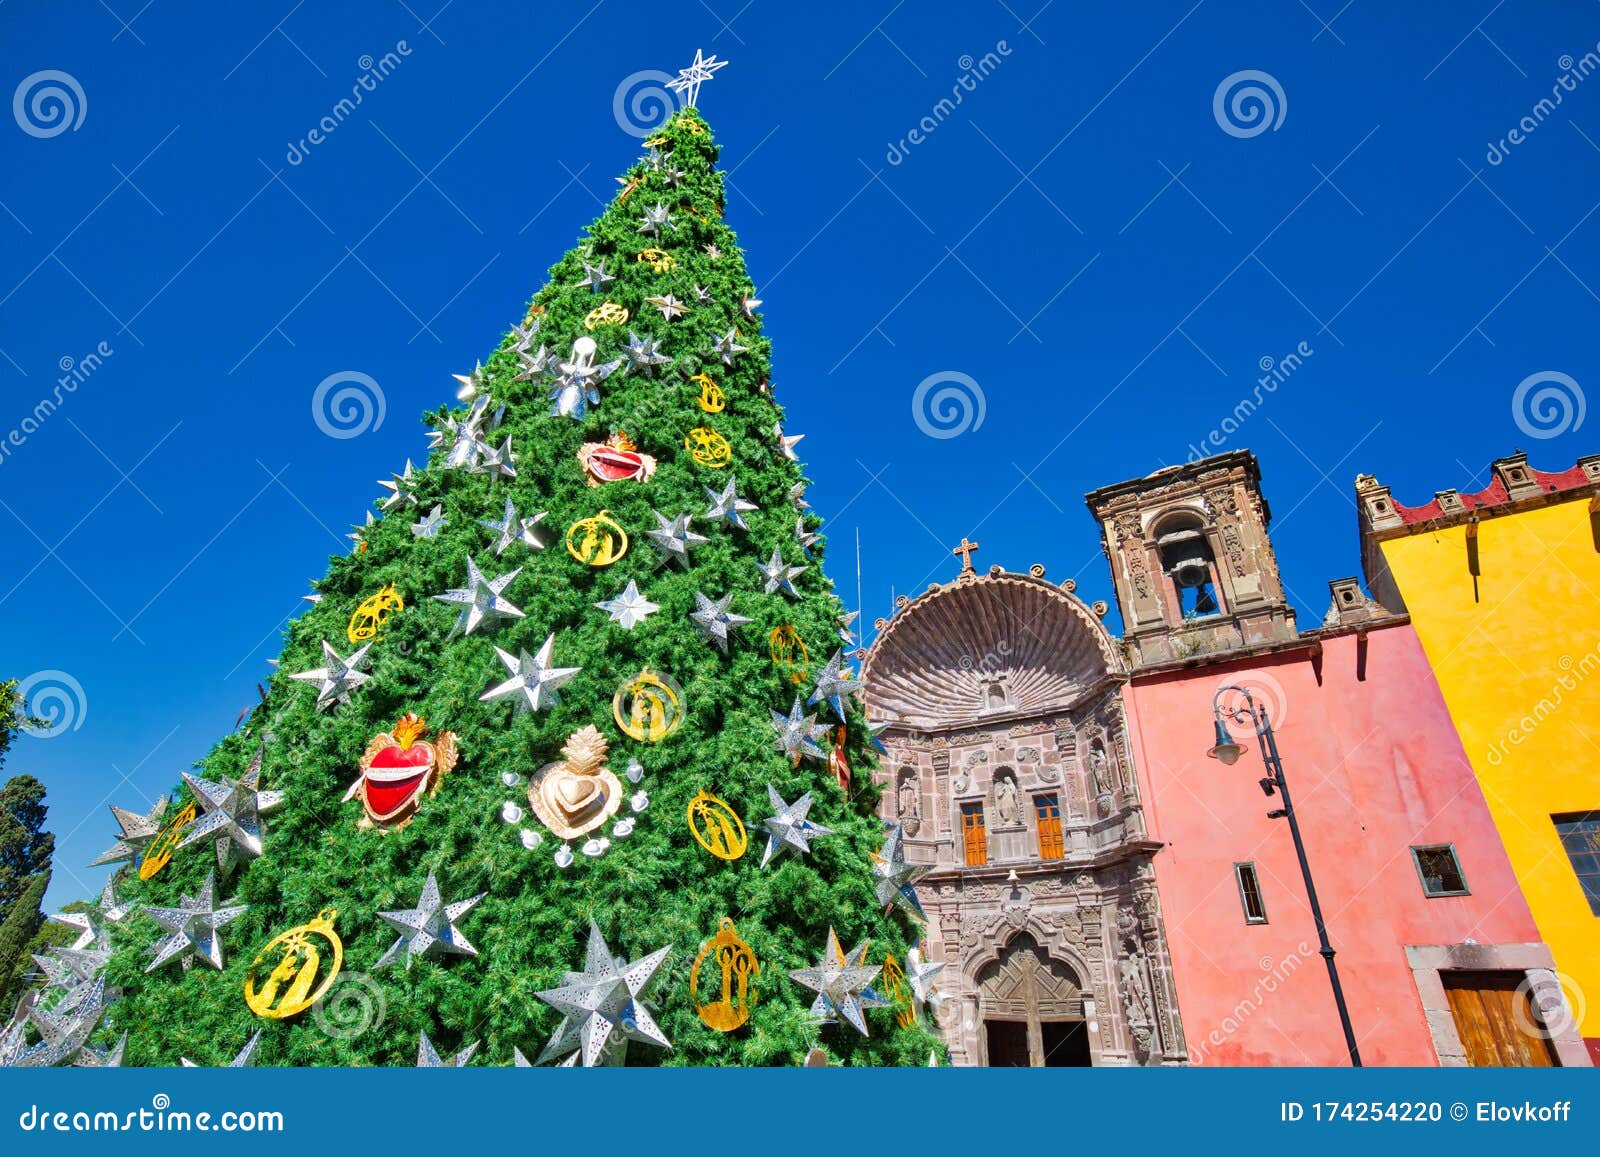 christmas decorations in front of nuestra senora de salud church in historic city center